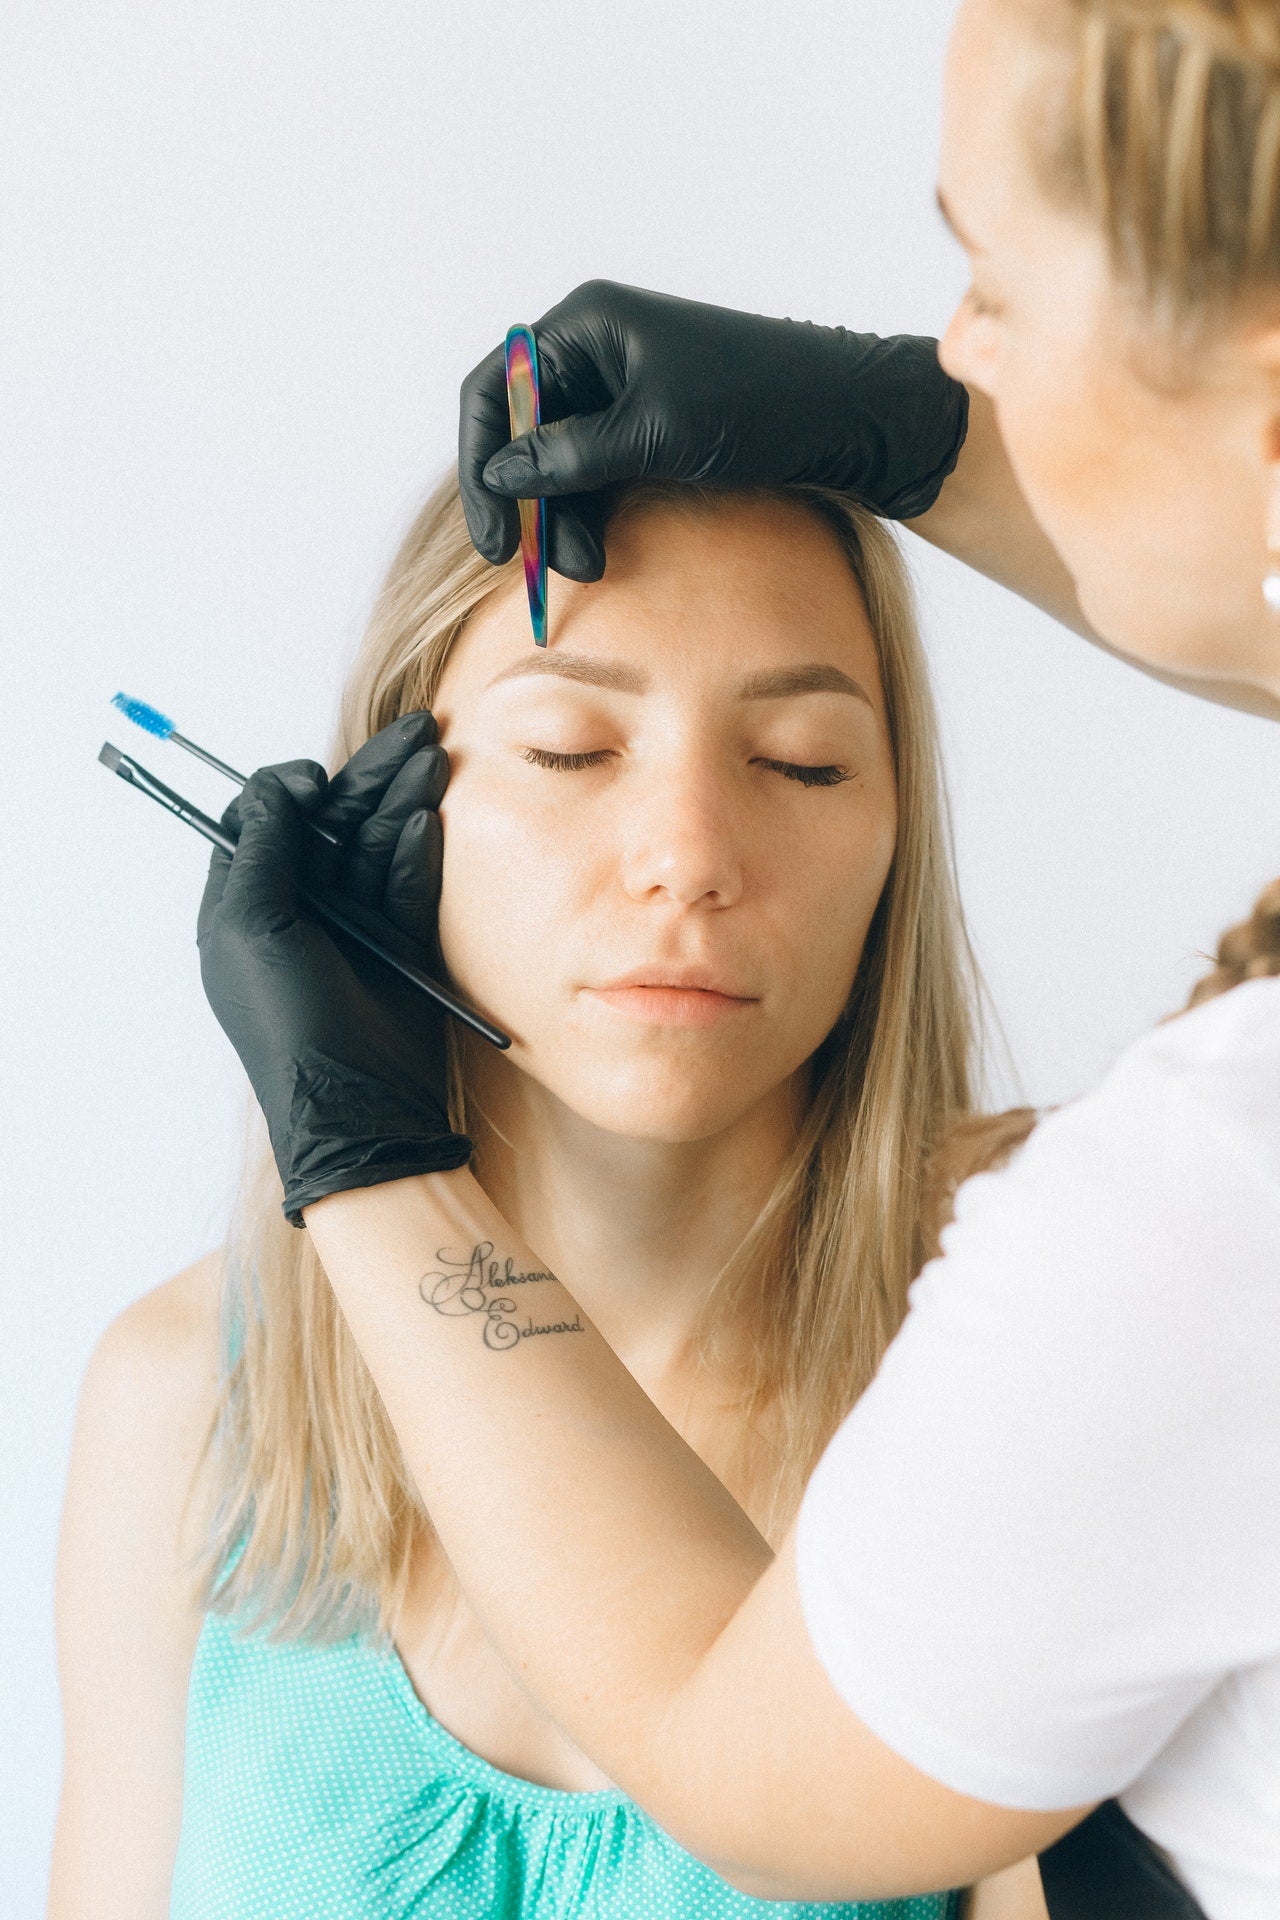 All You Need to Know About Microblading Ink and Pigment